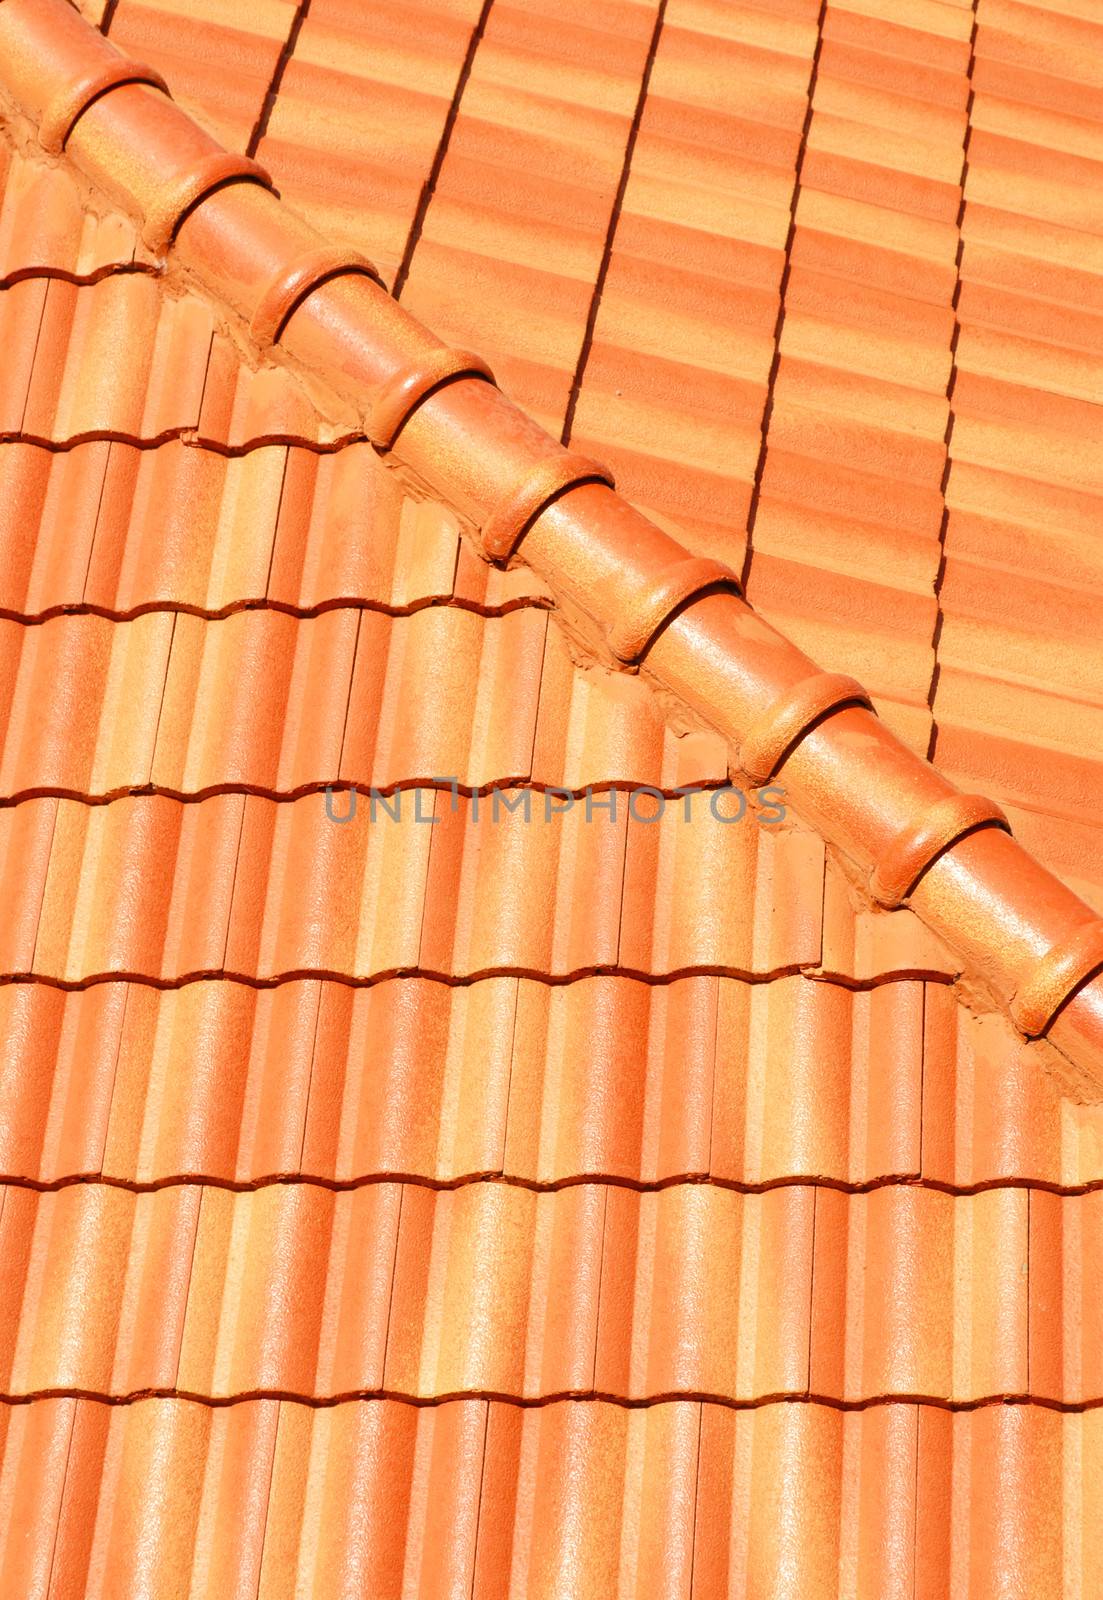 Roof tiles by apichart